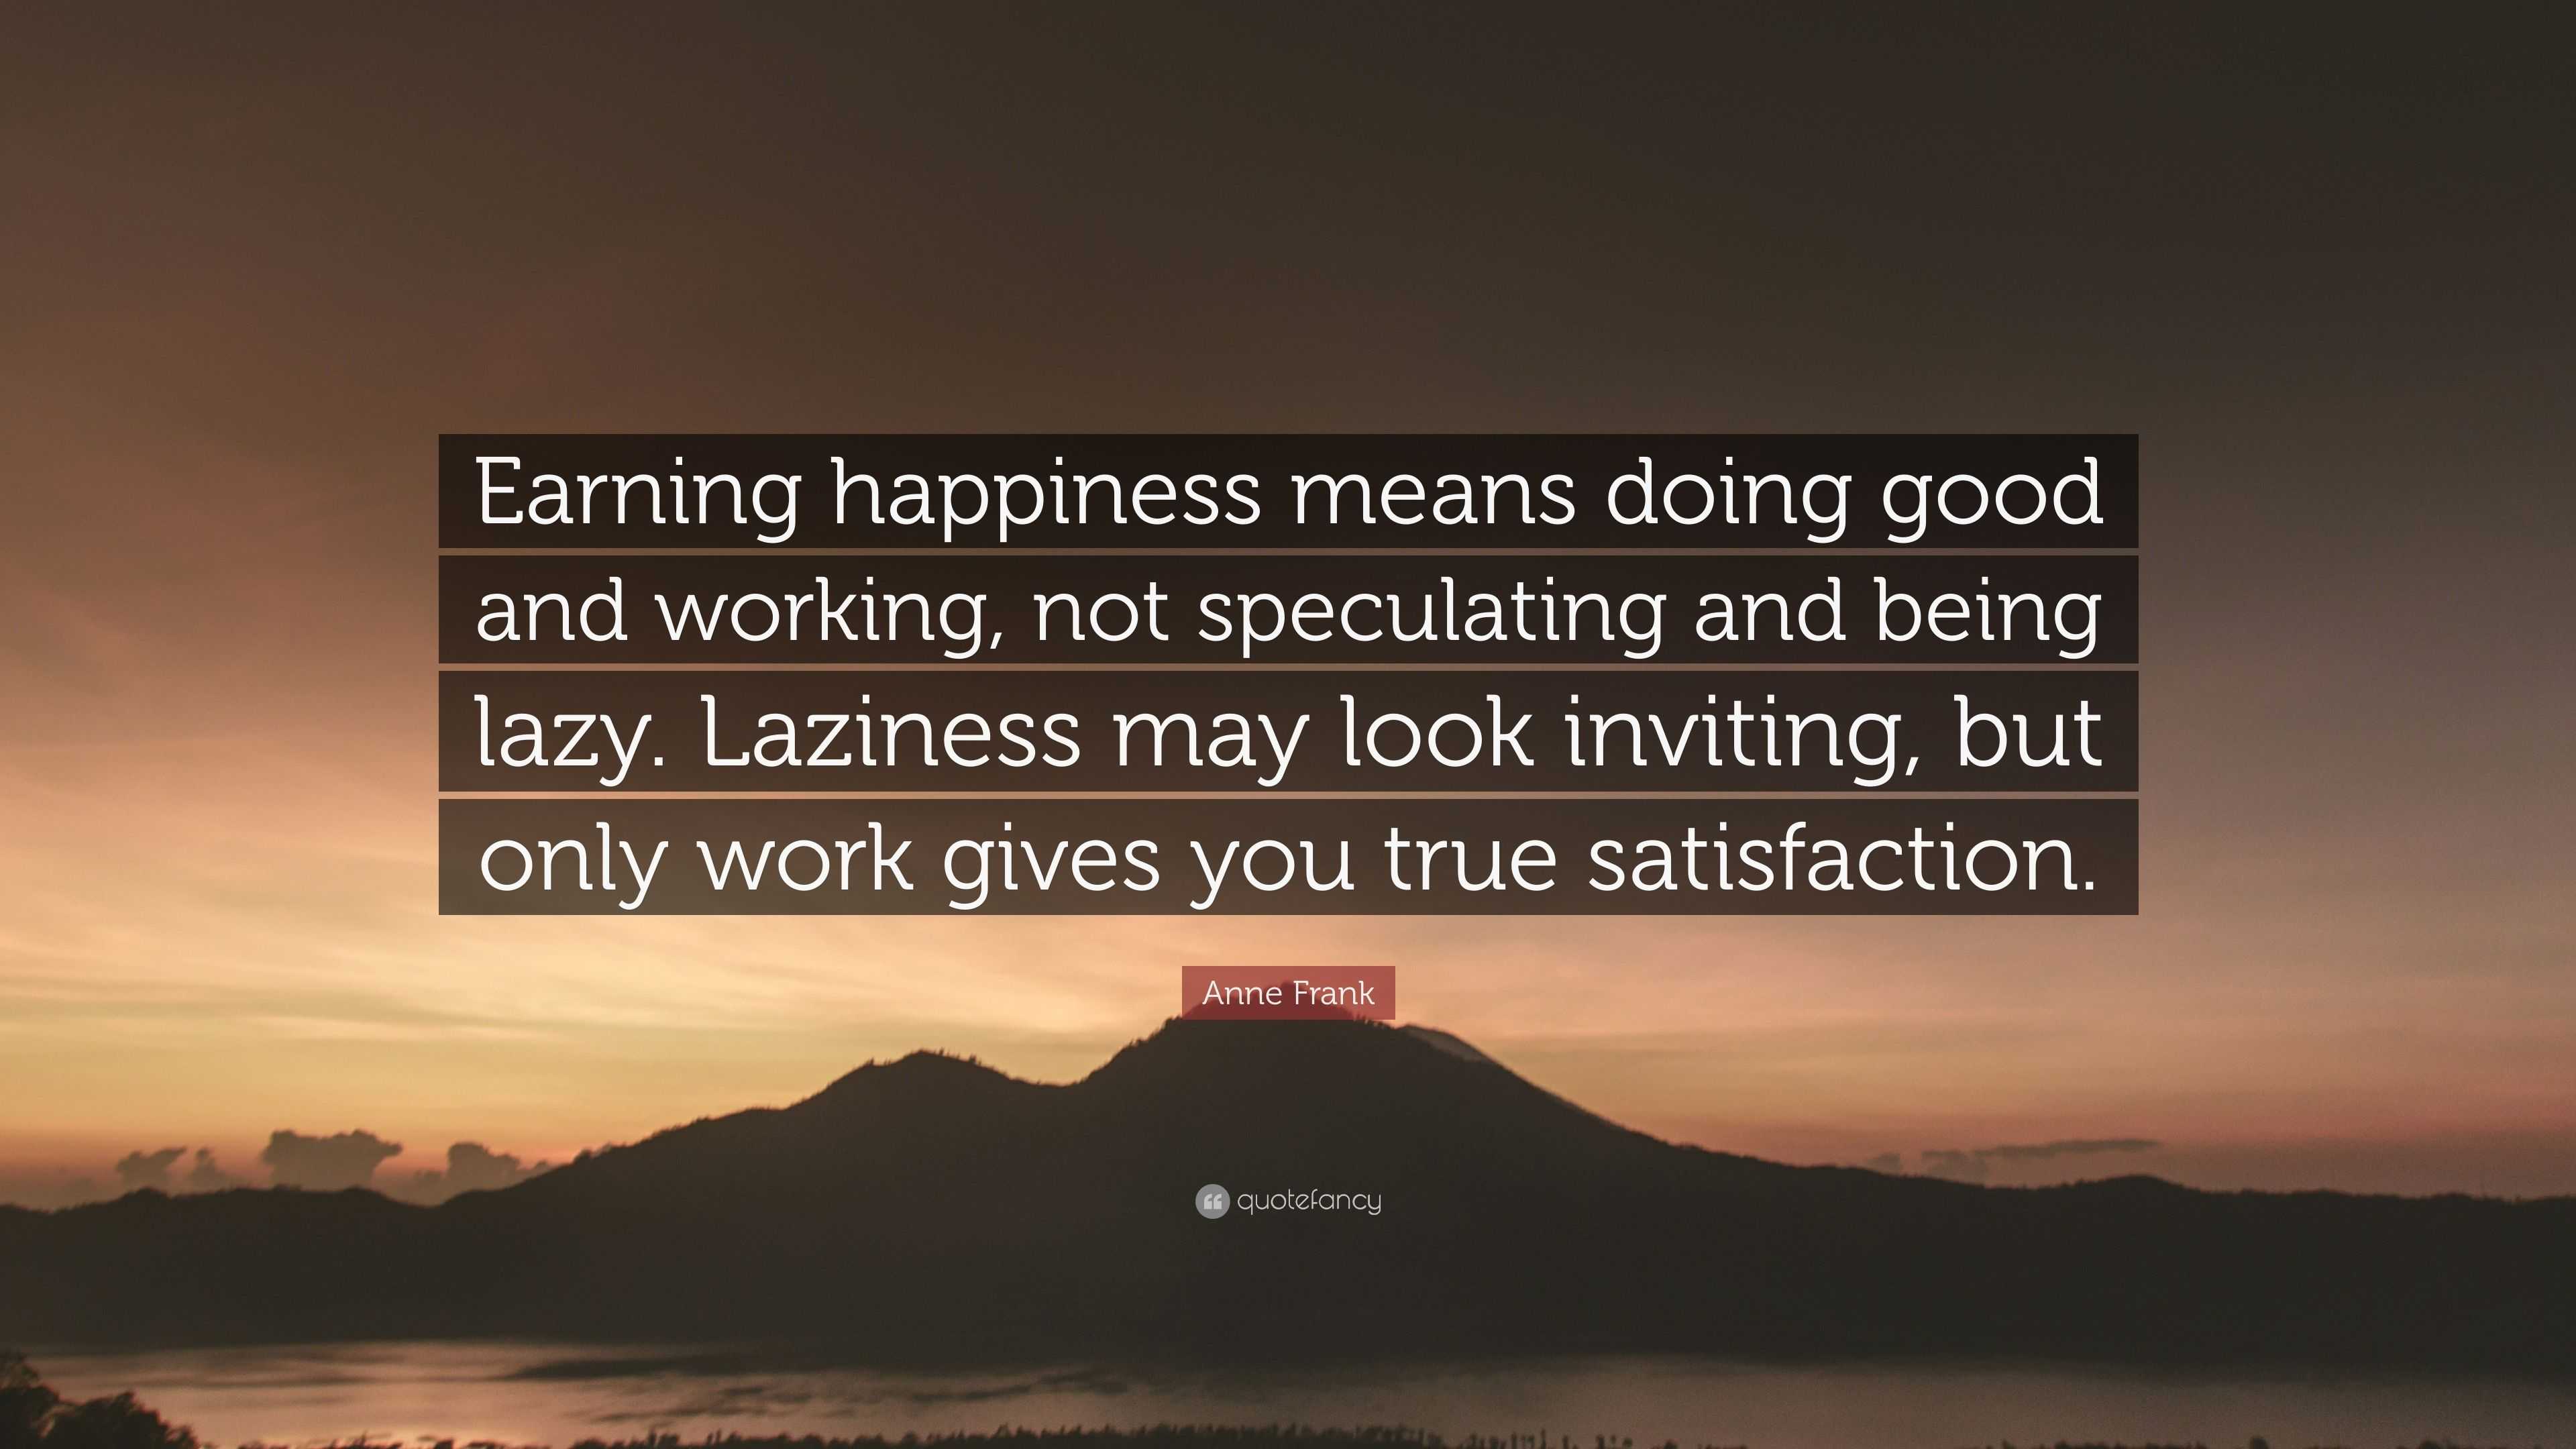 Anne Frank Quote: “Earning happiness means doing good and working, not ...